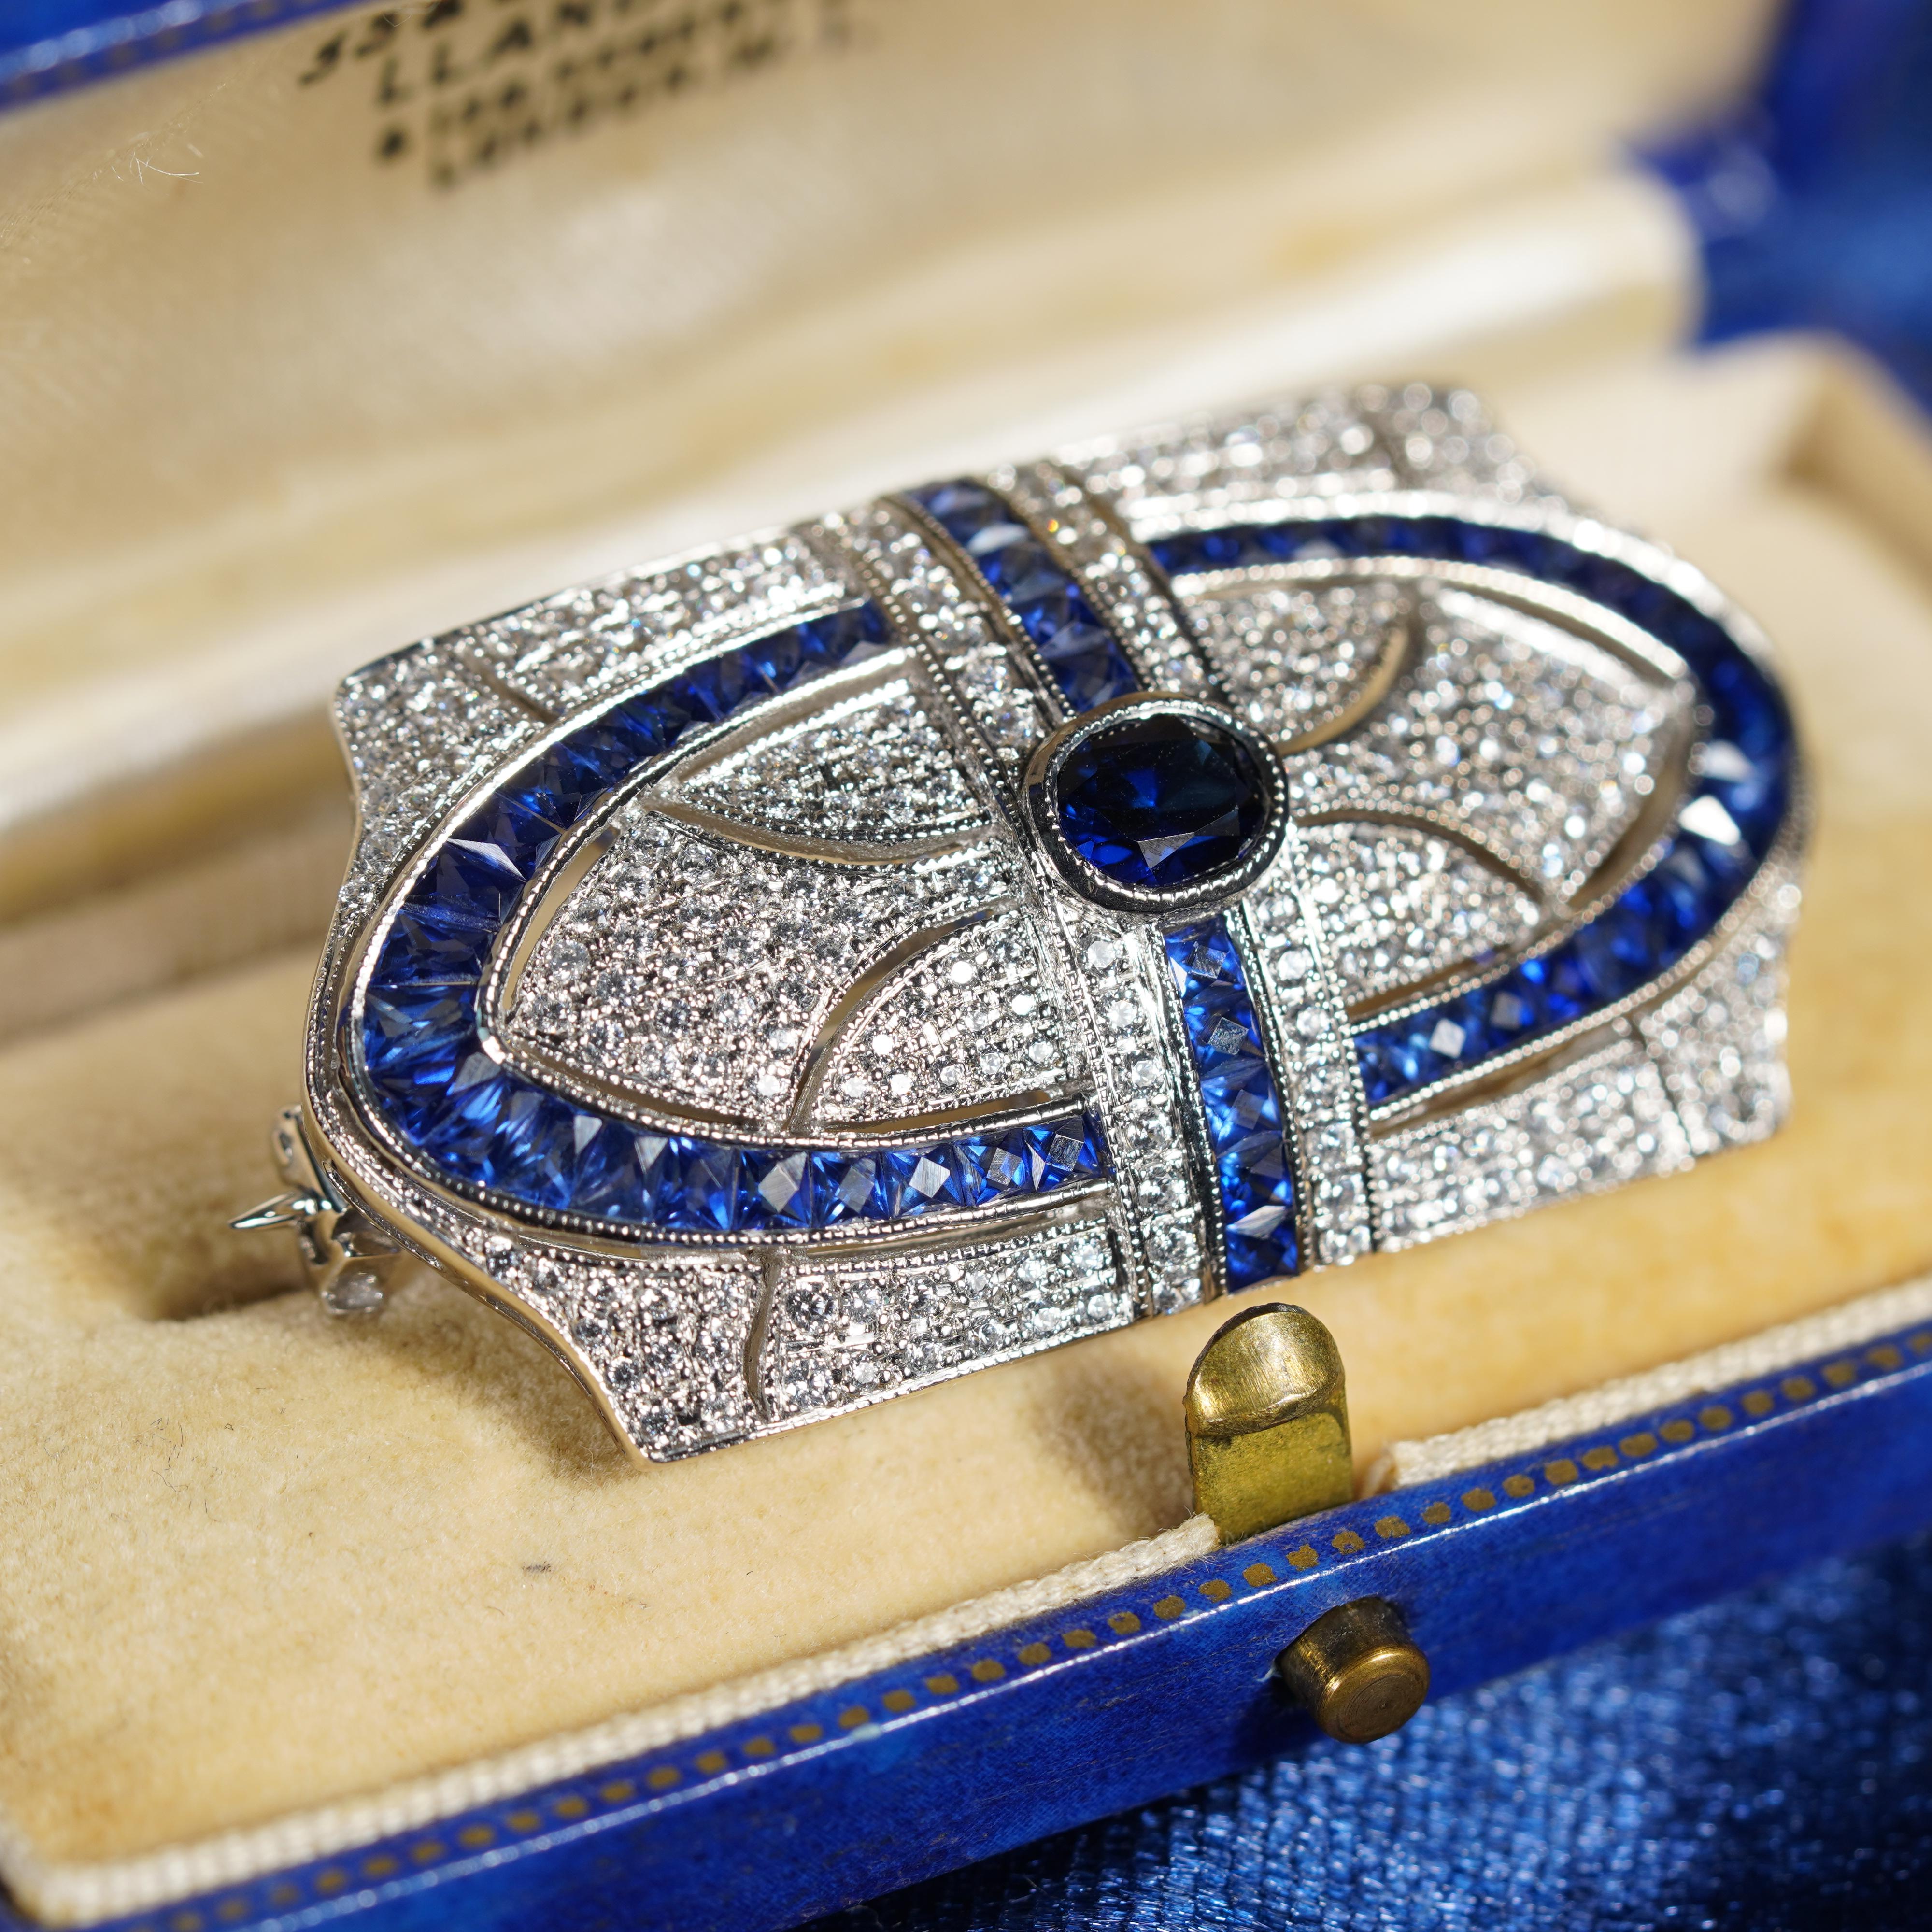 This is an impressive vintage inspired brooch set in 18k white gold featuring a gorgeous oval cut blue sapphire gemstone measuring 6 x 5 mm. The brooch is further set with stunning round cut diamonds of H color and SI clarity with French cut blue